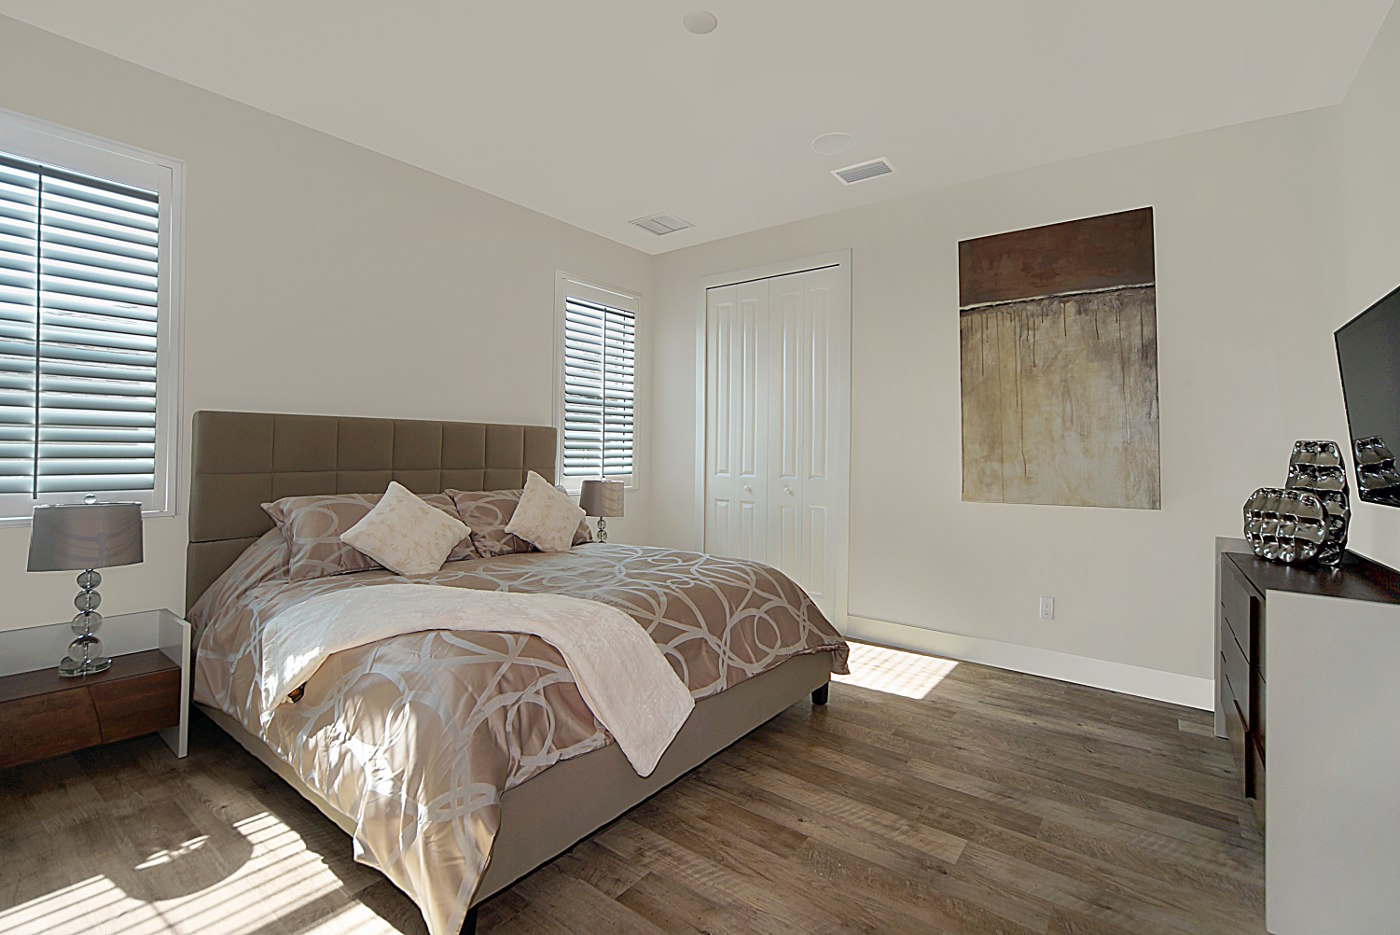 Bedrooms in Cape Coral